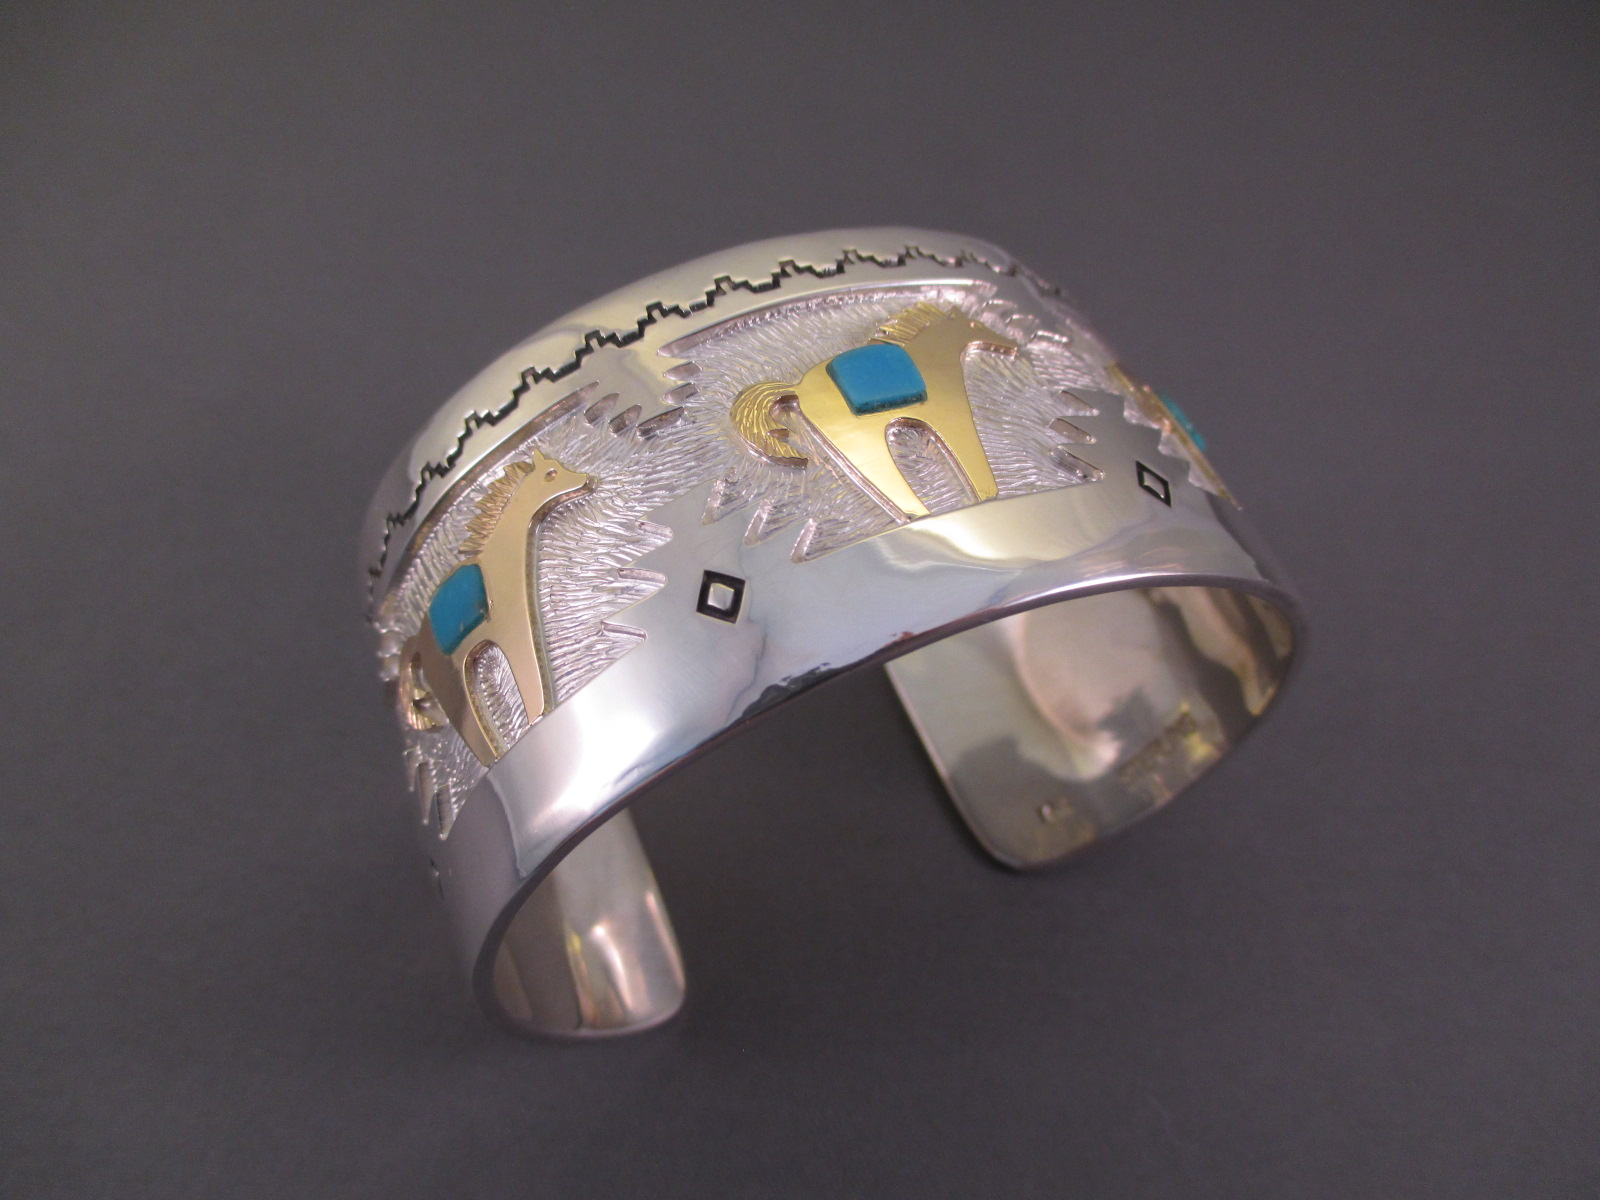 Sterling Silver, 14kt Gold, and Kingman Turquoise 'Horse' Cuff Bracelet by Native American Wichita Indian jewelry artist, Dina Huntinghorse